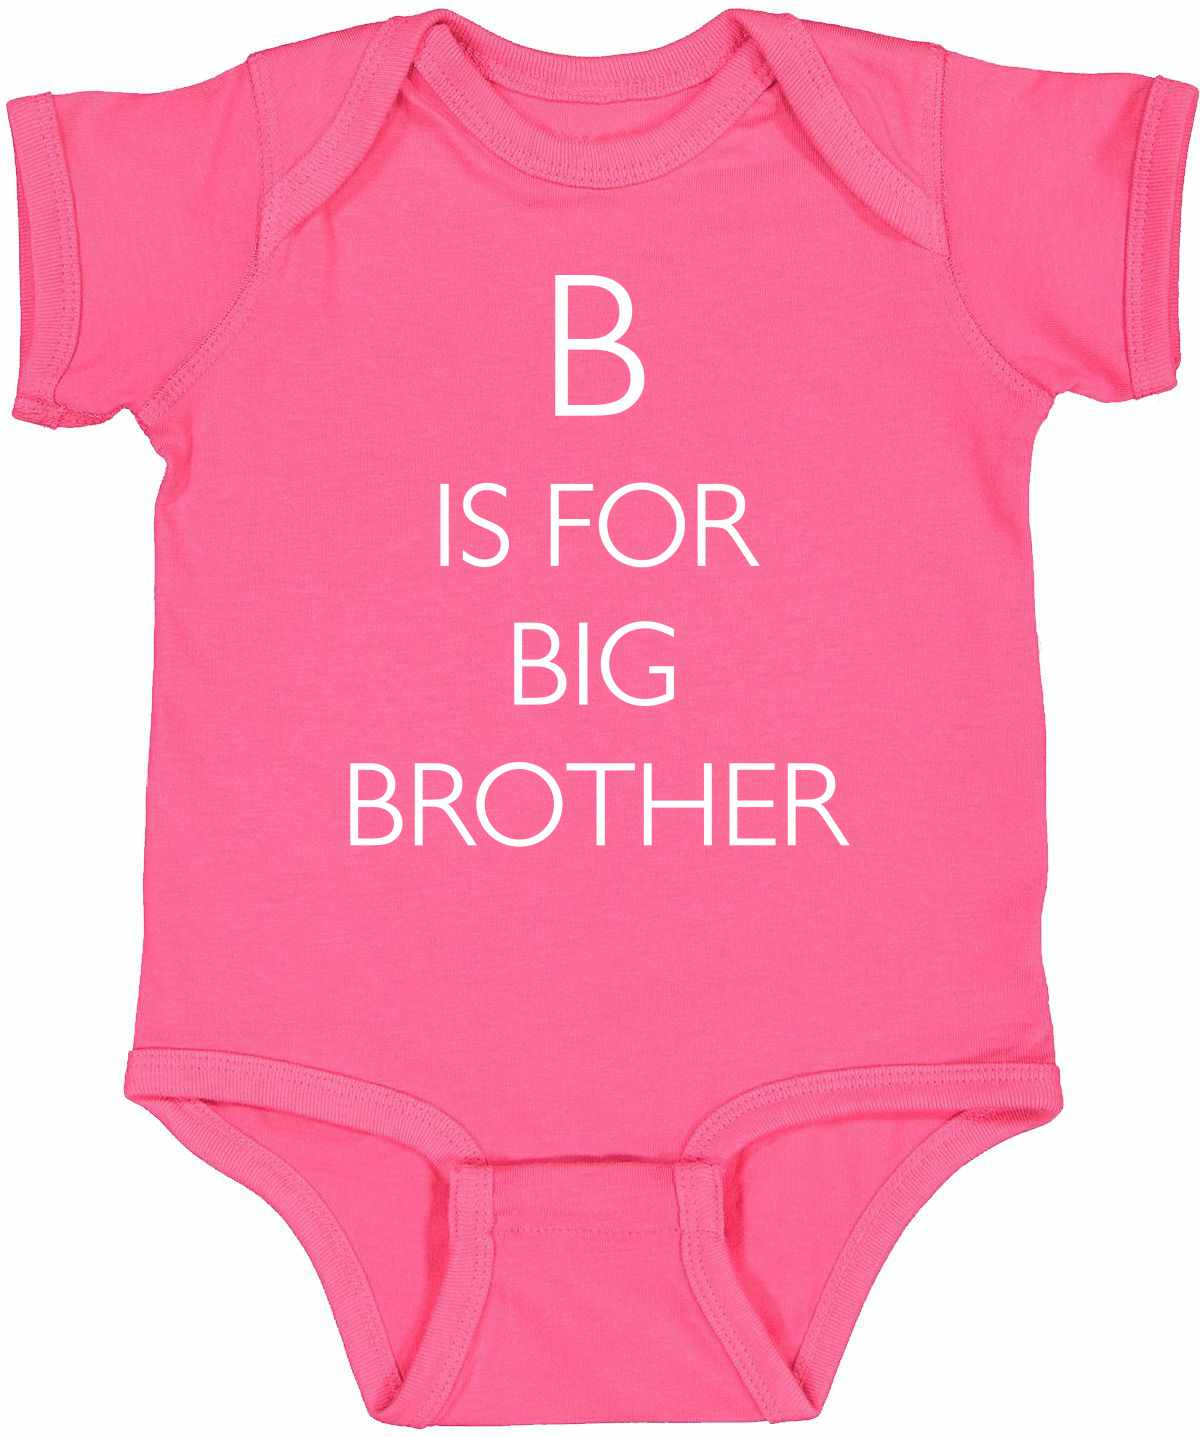 B is for Big Brother Infant BodySuit (#1179-10)